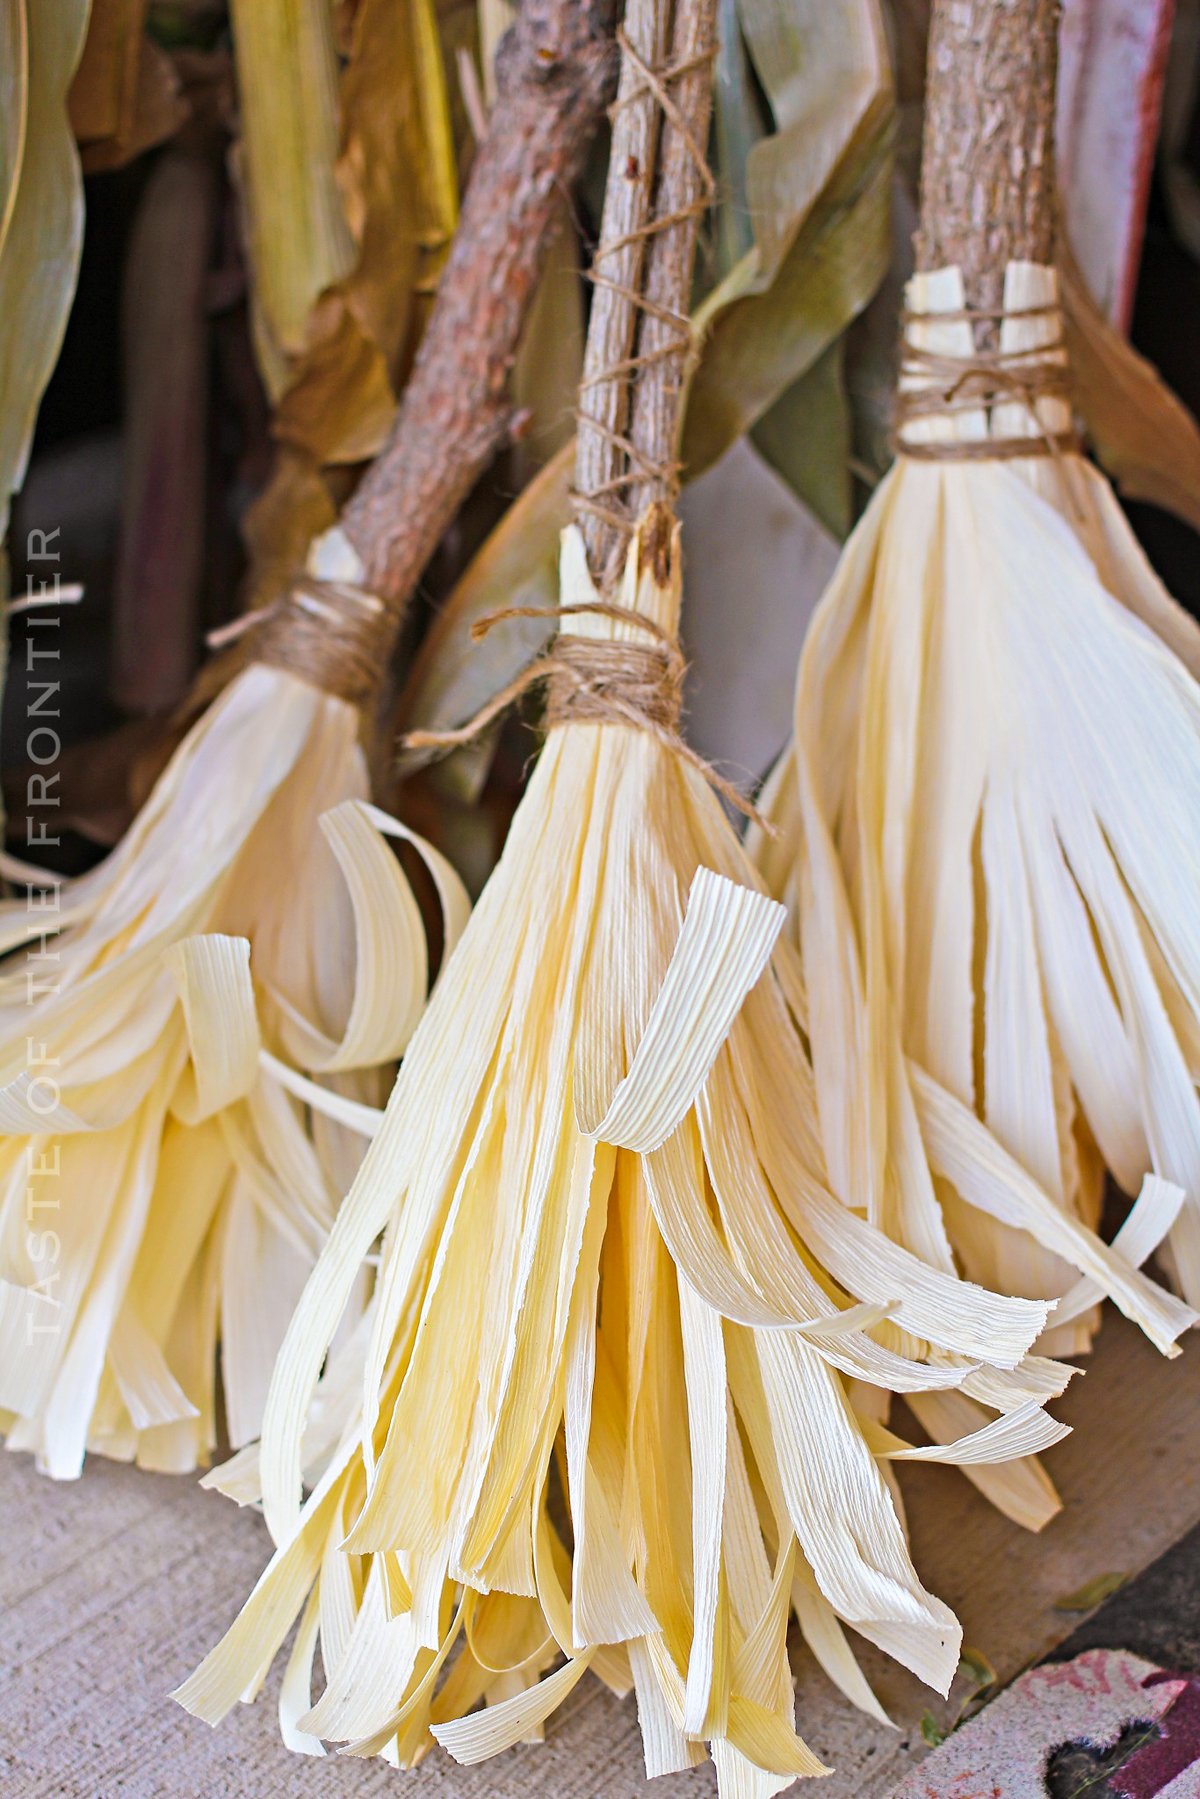 Brooms made from Corn Husk Craft